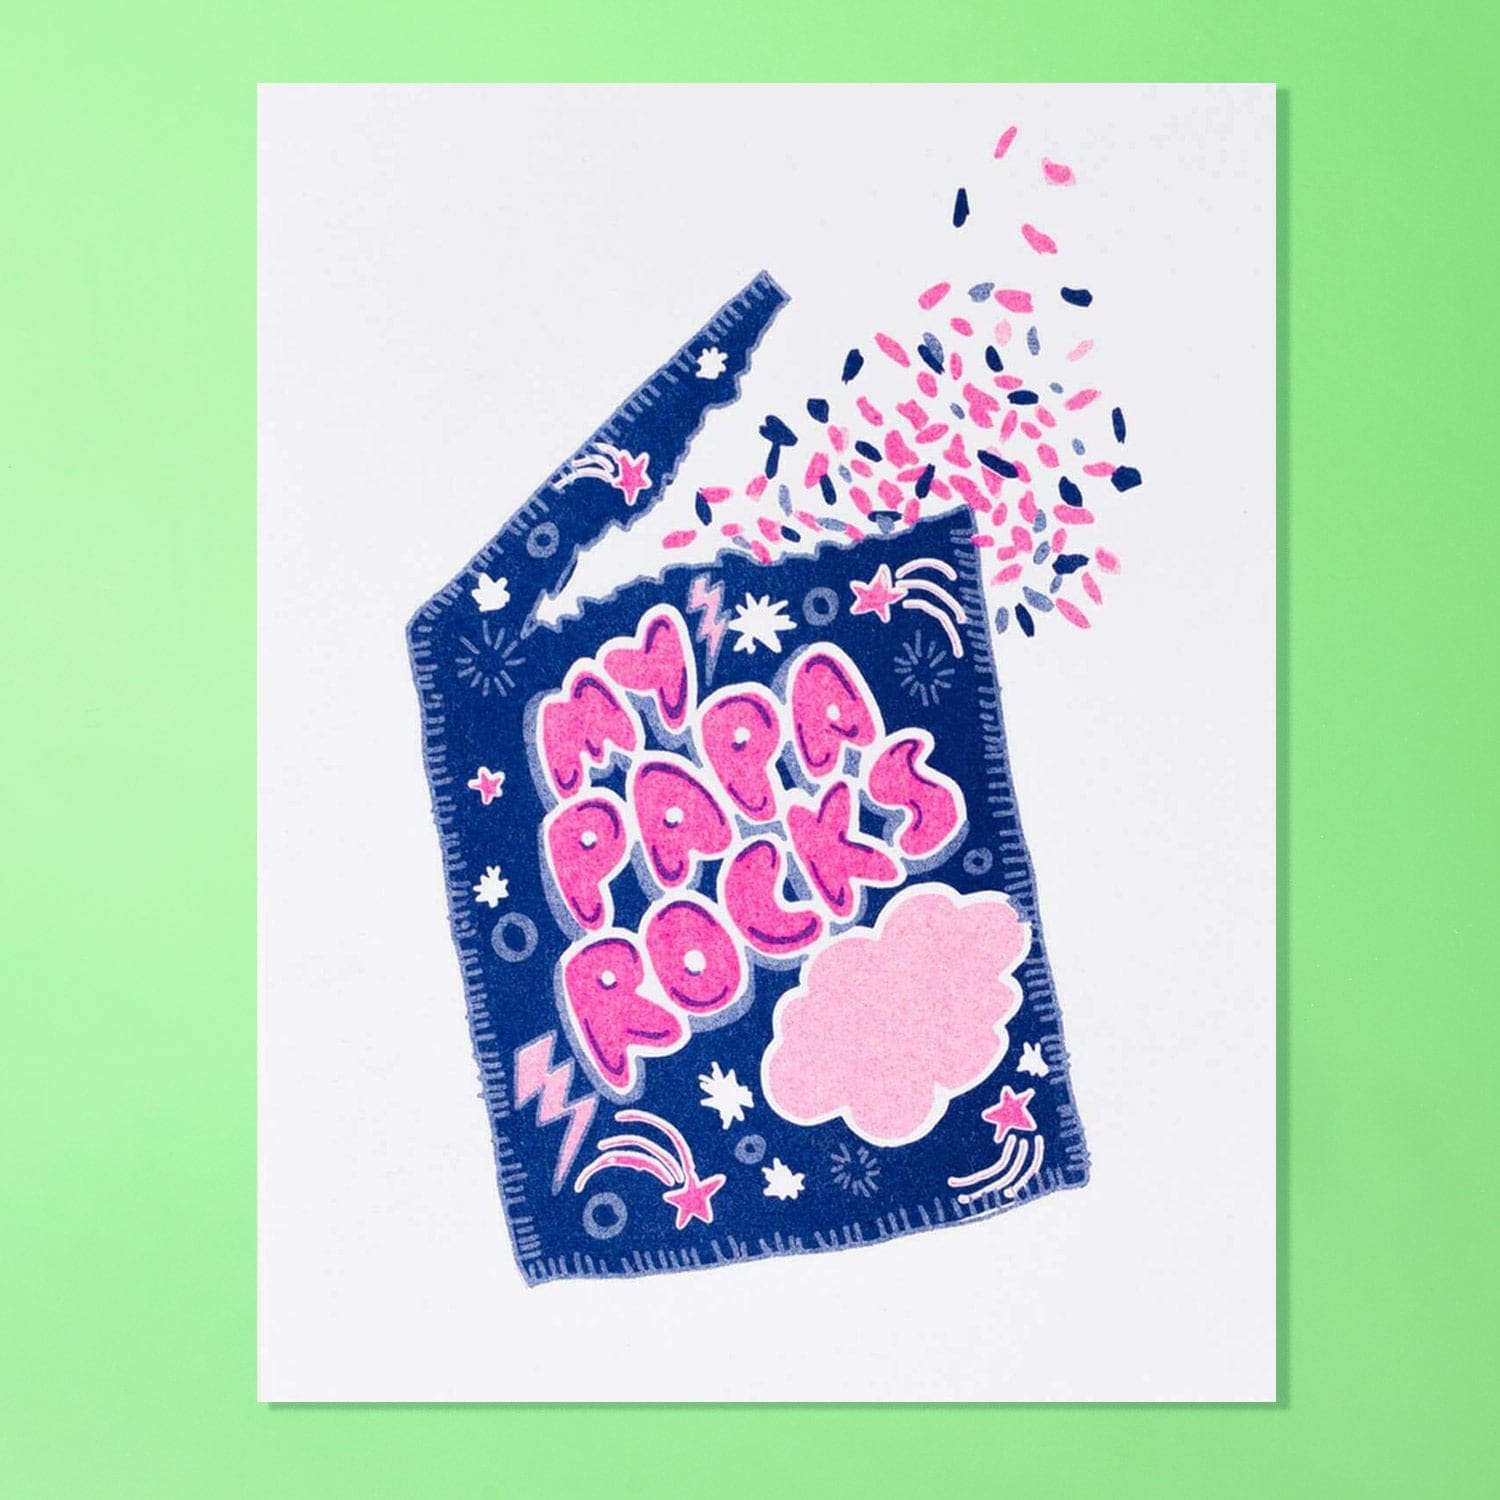 Papa Rocks Father’s Day - Risograph Greeting Card Candy - 